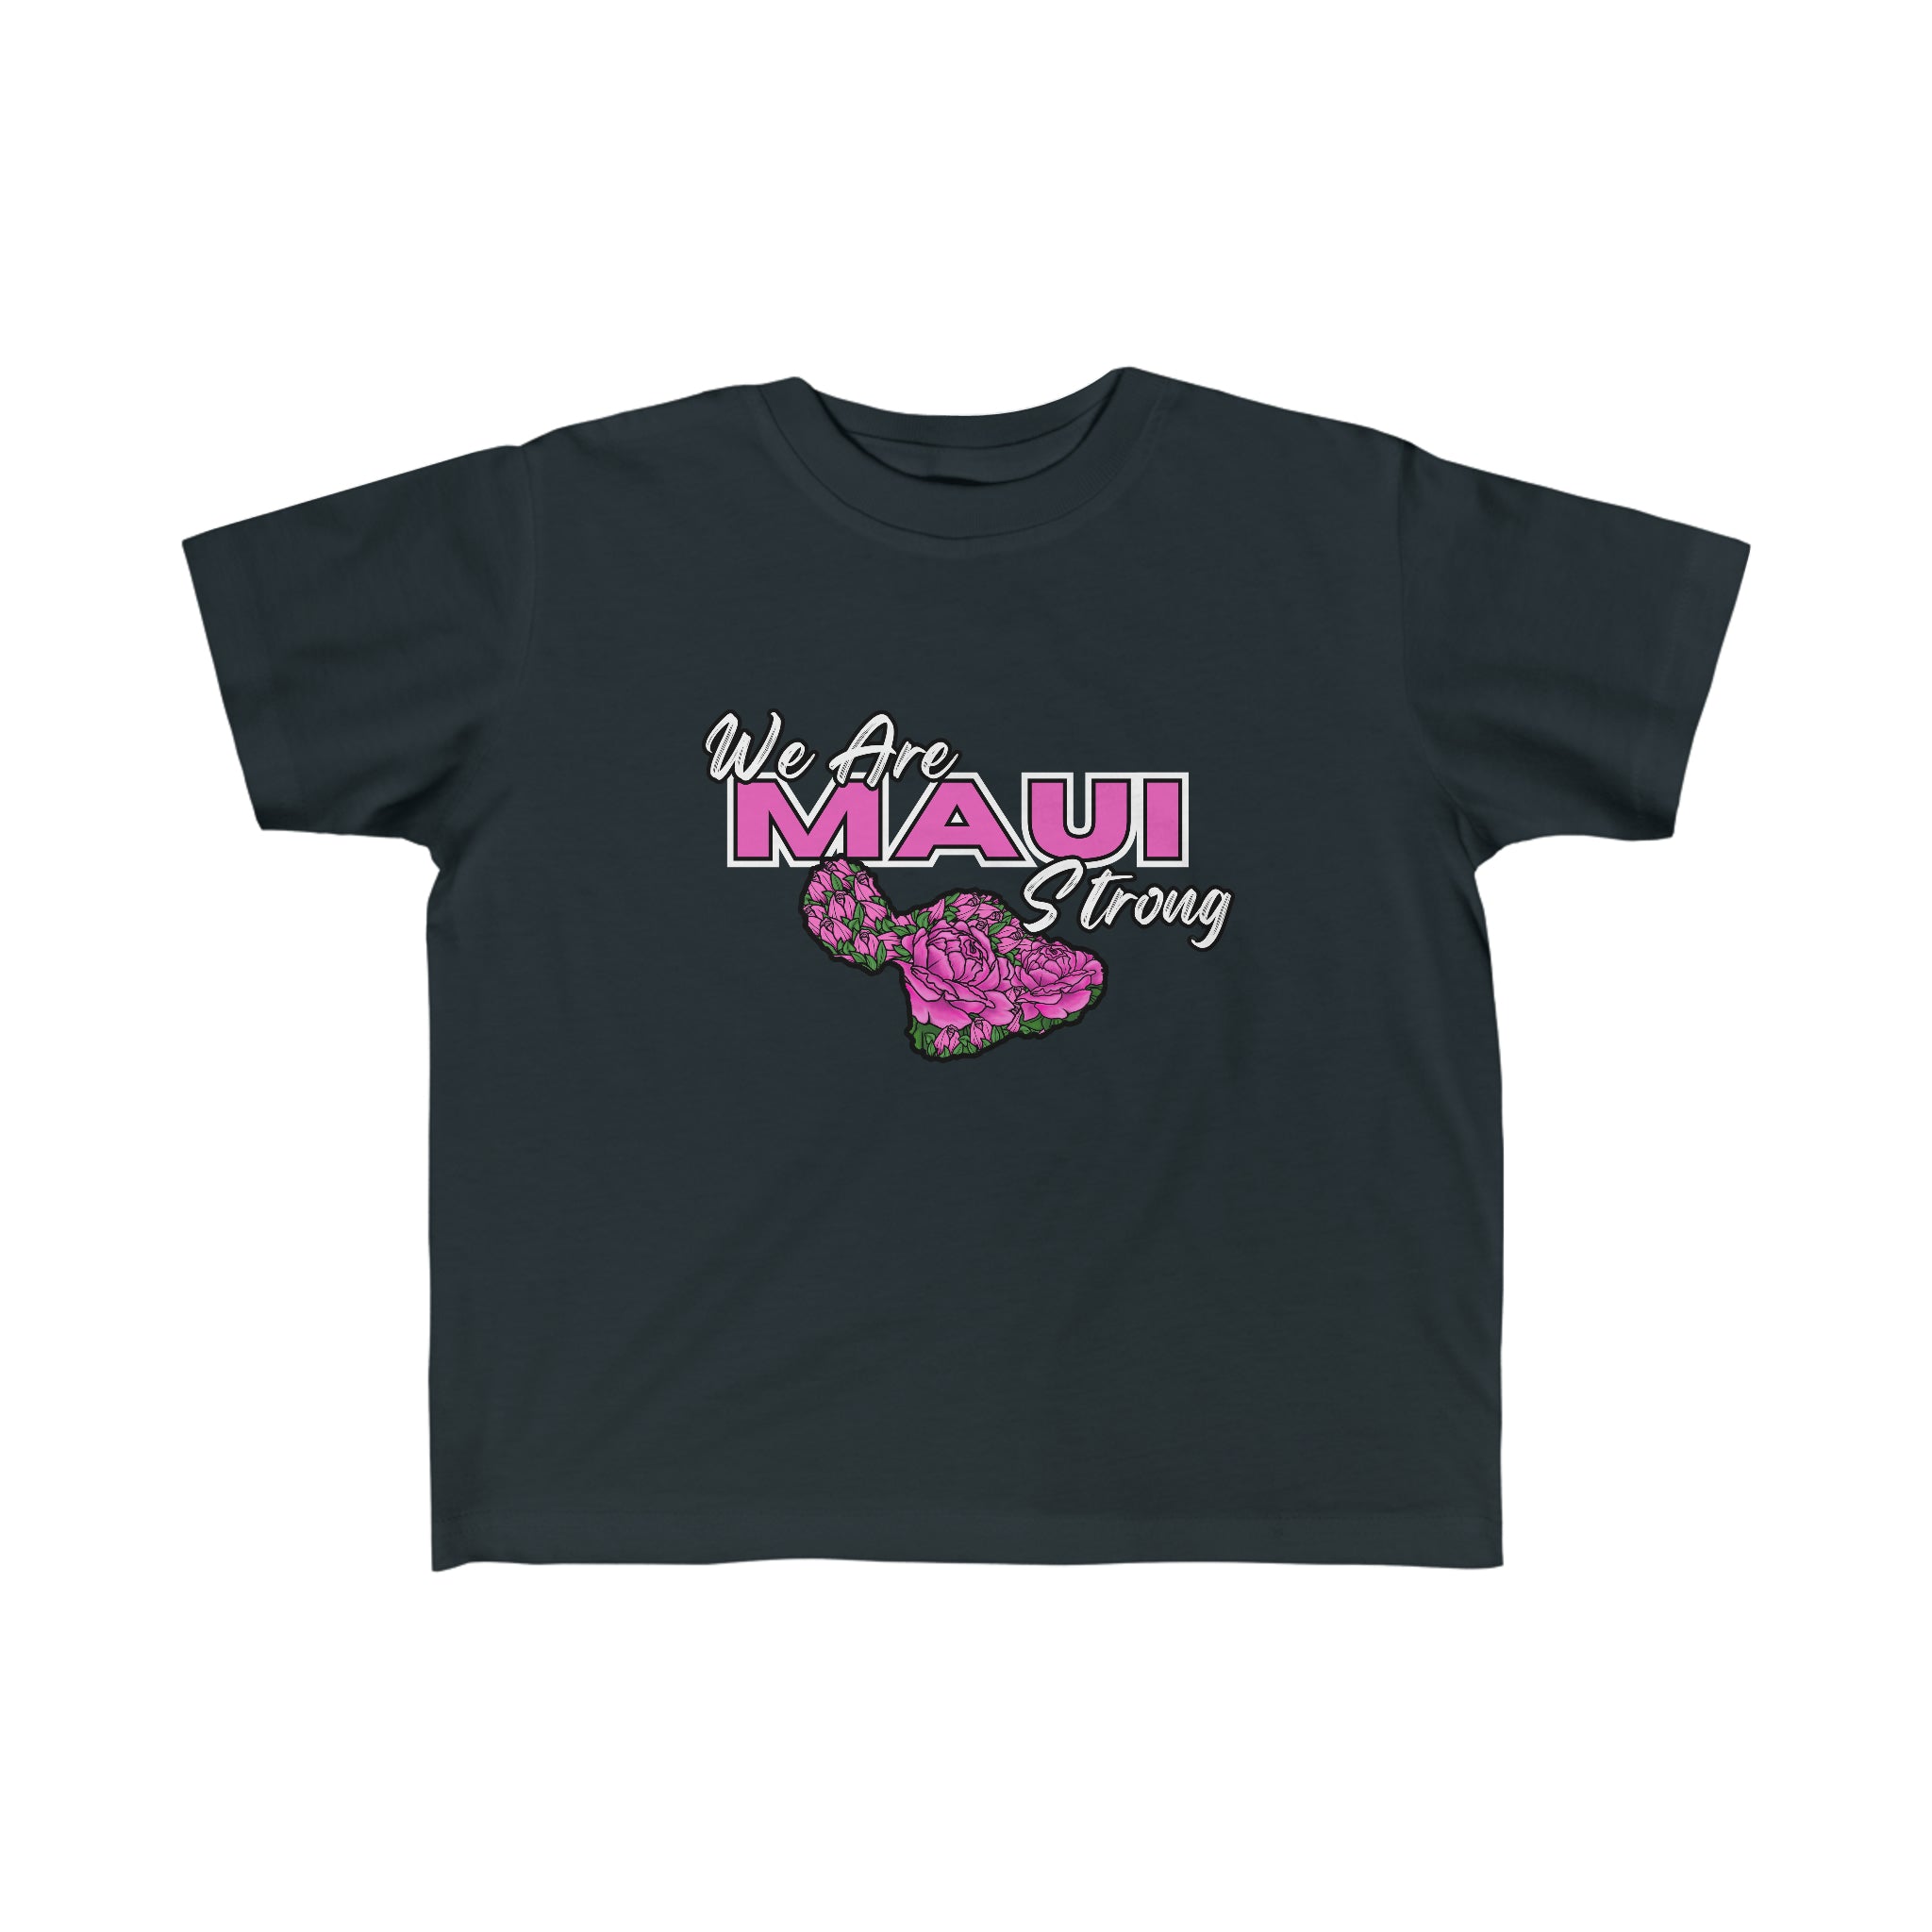 We Are Maui Strong - Toddler's Fine Jersey Tee